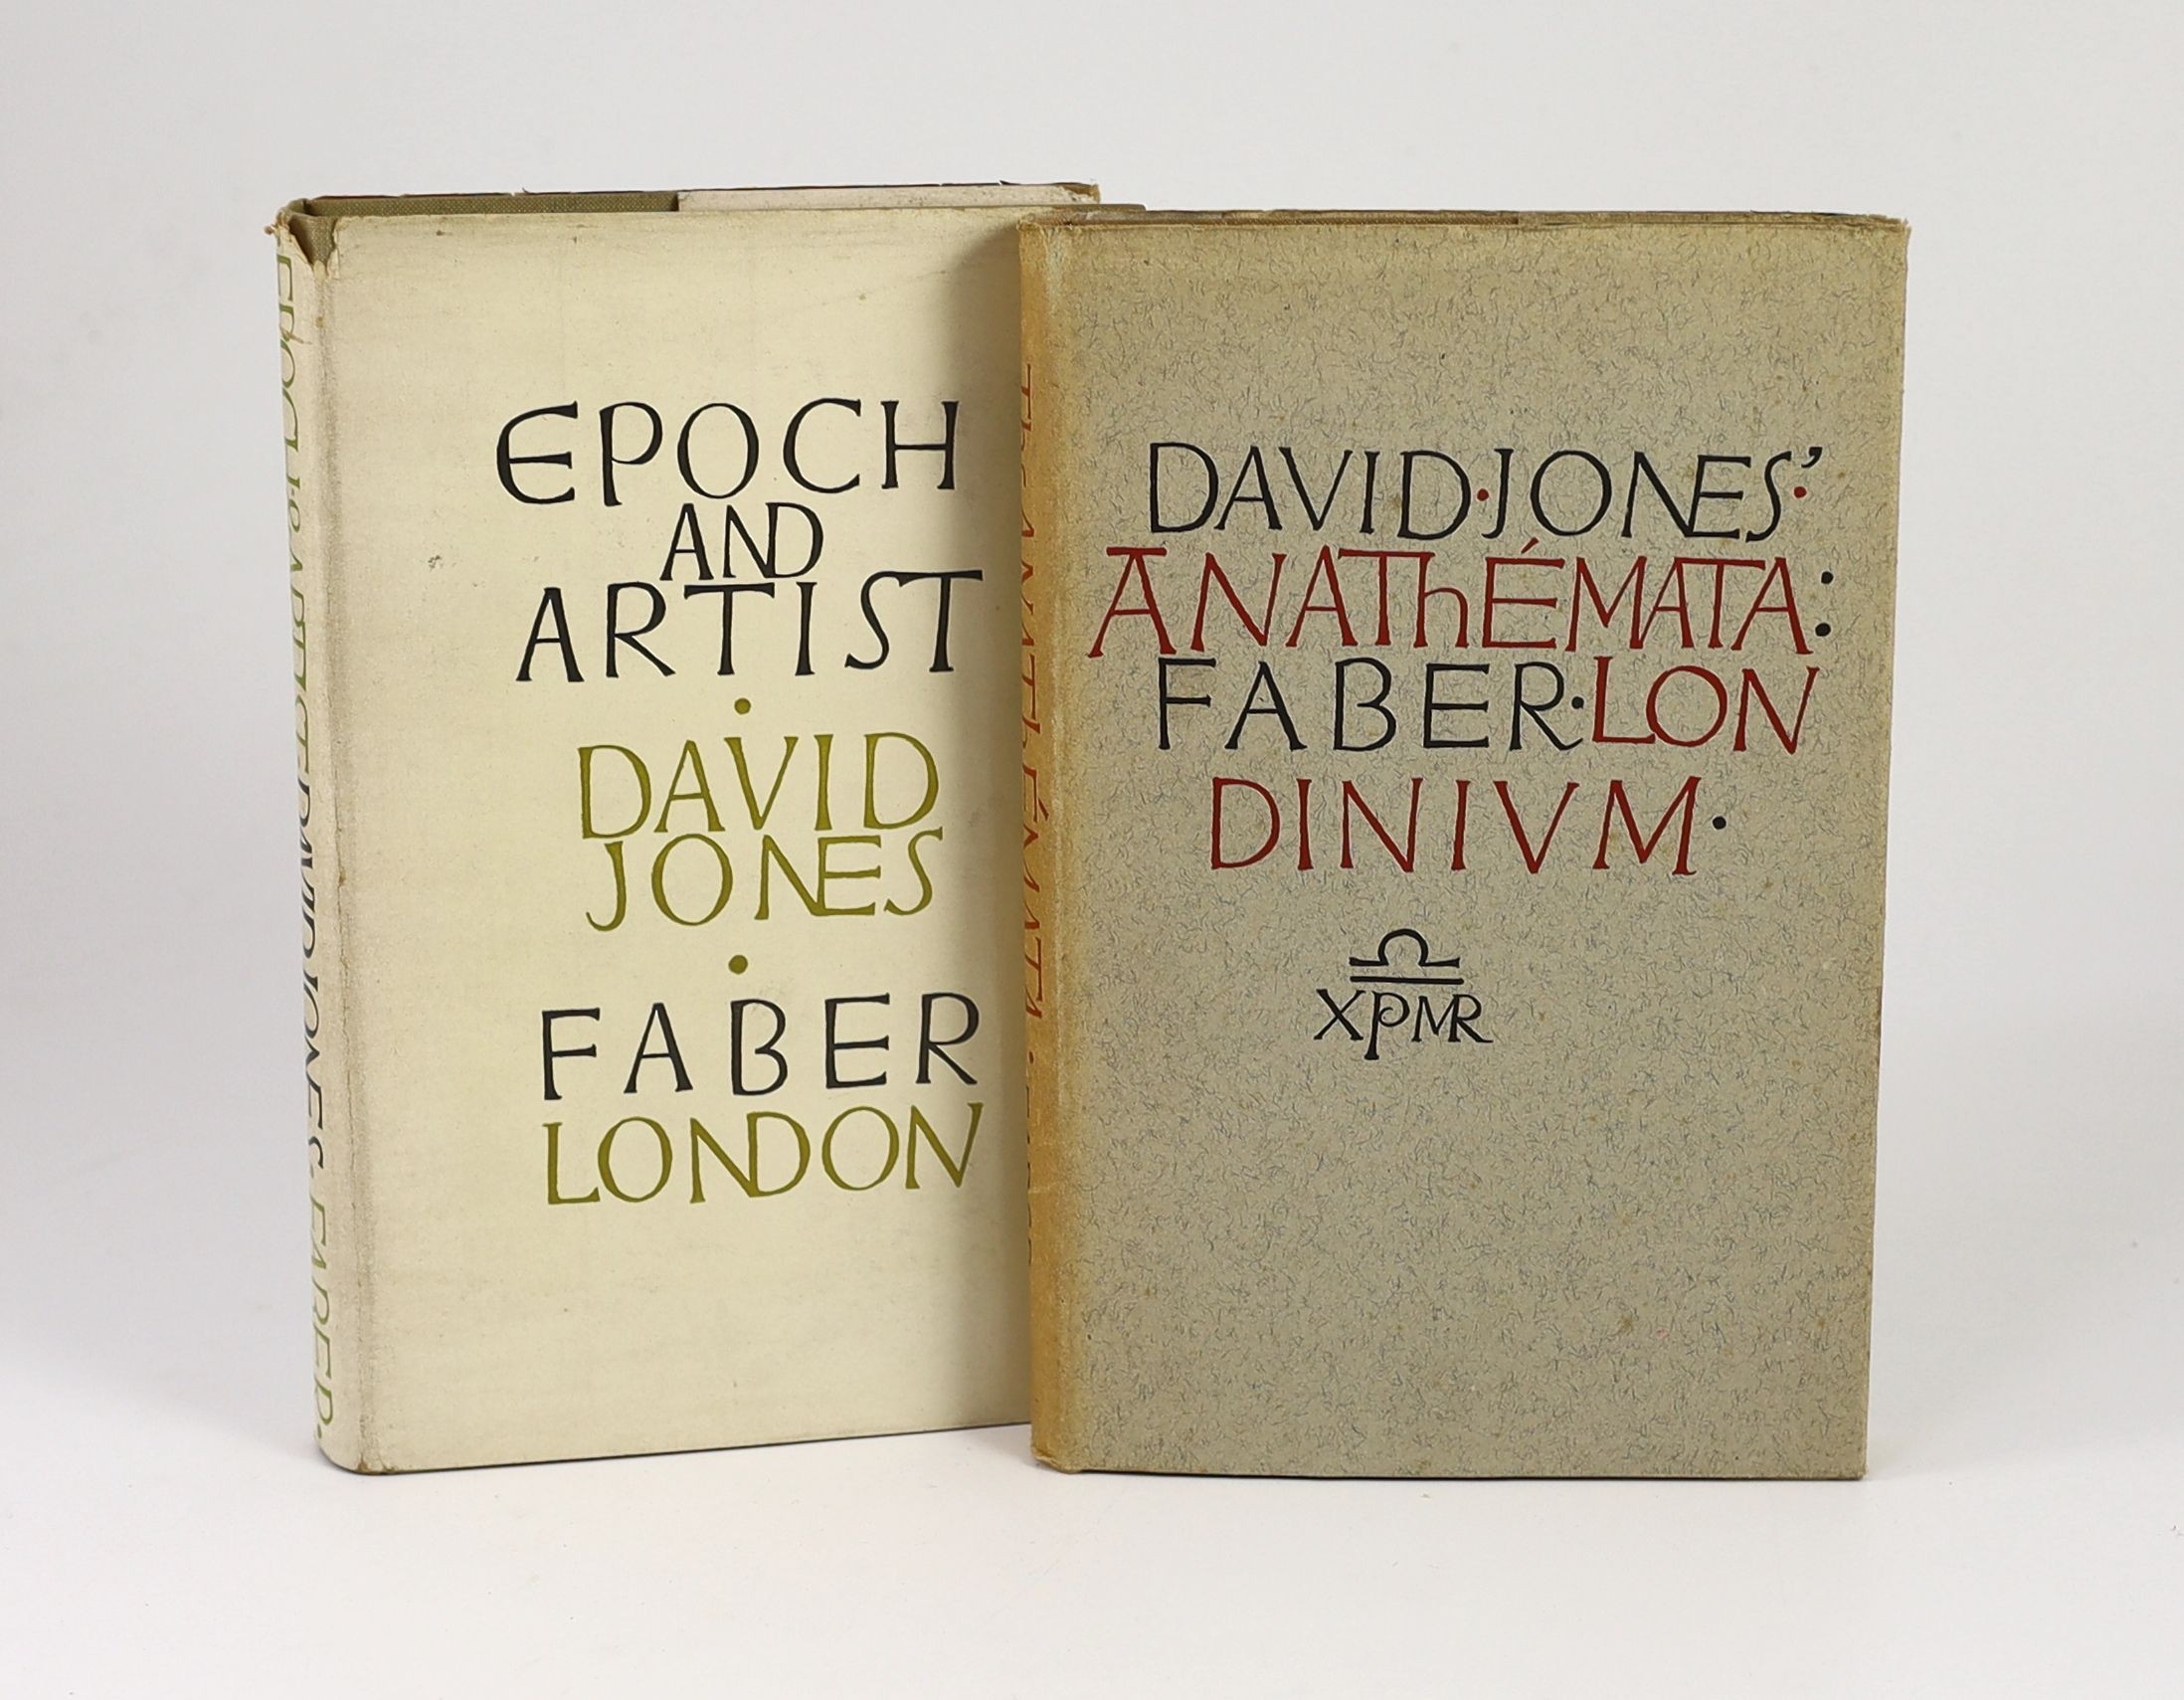 Jones, David - In Parenthesis. Complete with frontis and tailpiece illustrations. Publishers cloth with title on spine. 8vo. Faber & Faber Ltd, London, 1937. Boards rubbed, hinges and joints starting. Minor spotting main